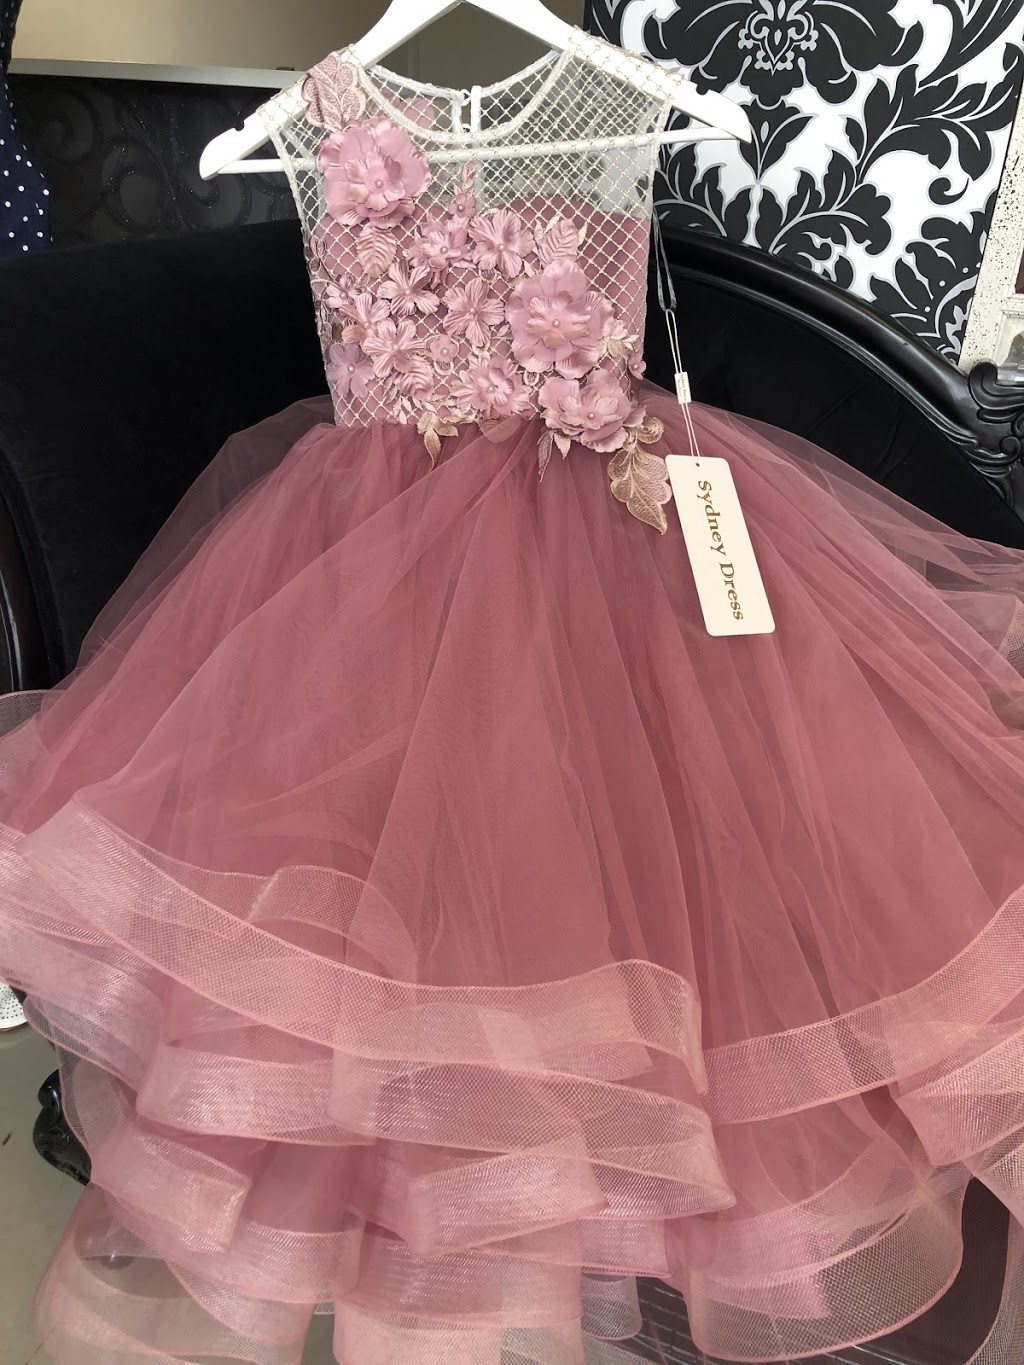 All Wedding Wishes | clothing store | c4/504-508 Woodville Rd, Guildford NSW 2161, Australia | 0296320440 OR +61 2 9632 0440